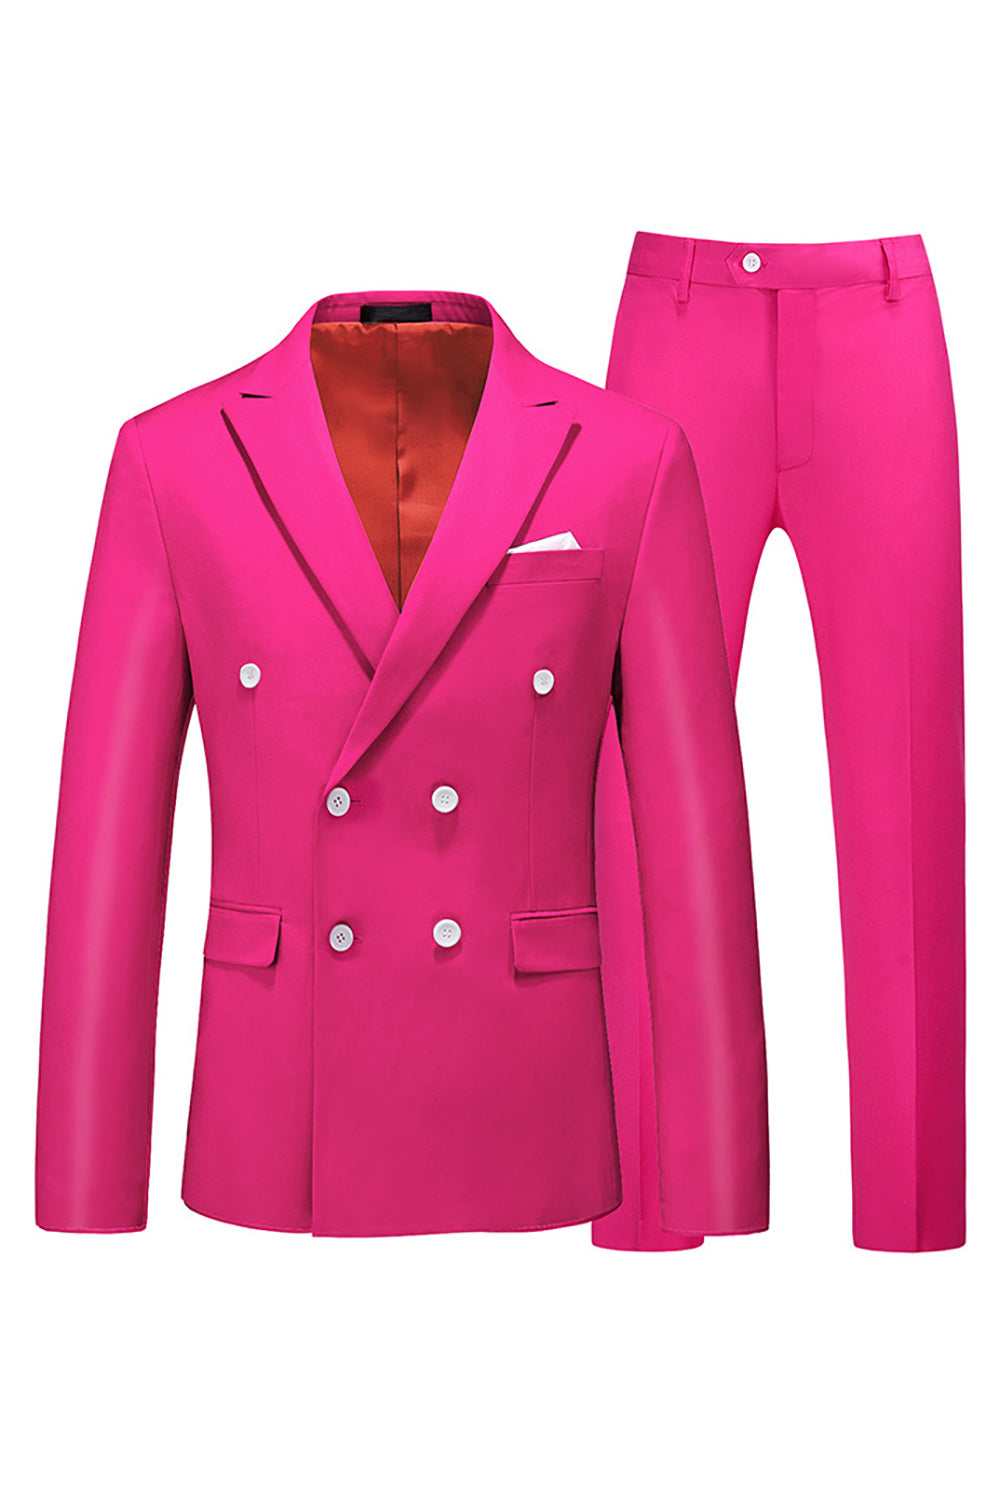 Hot Pink Double Breasted 2 Piece Formal Men Suits